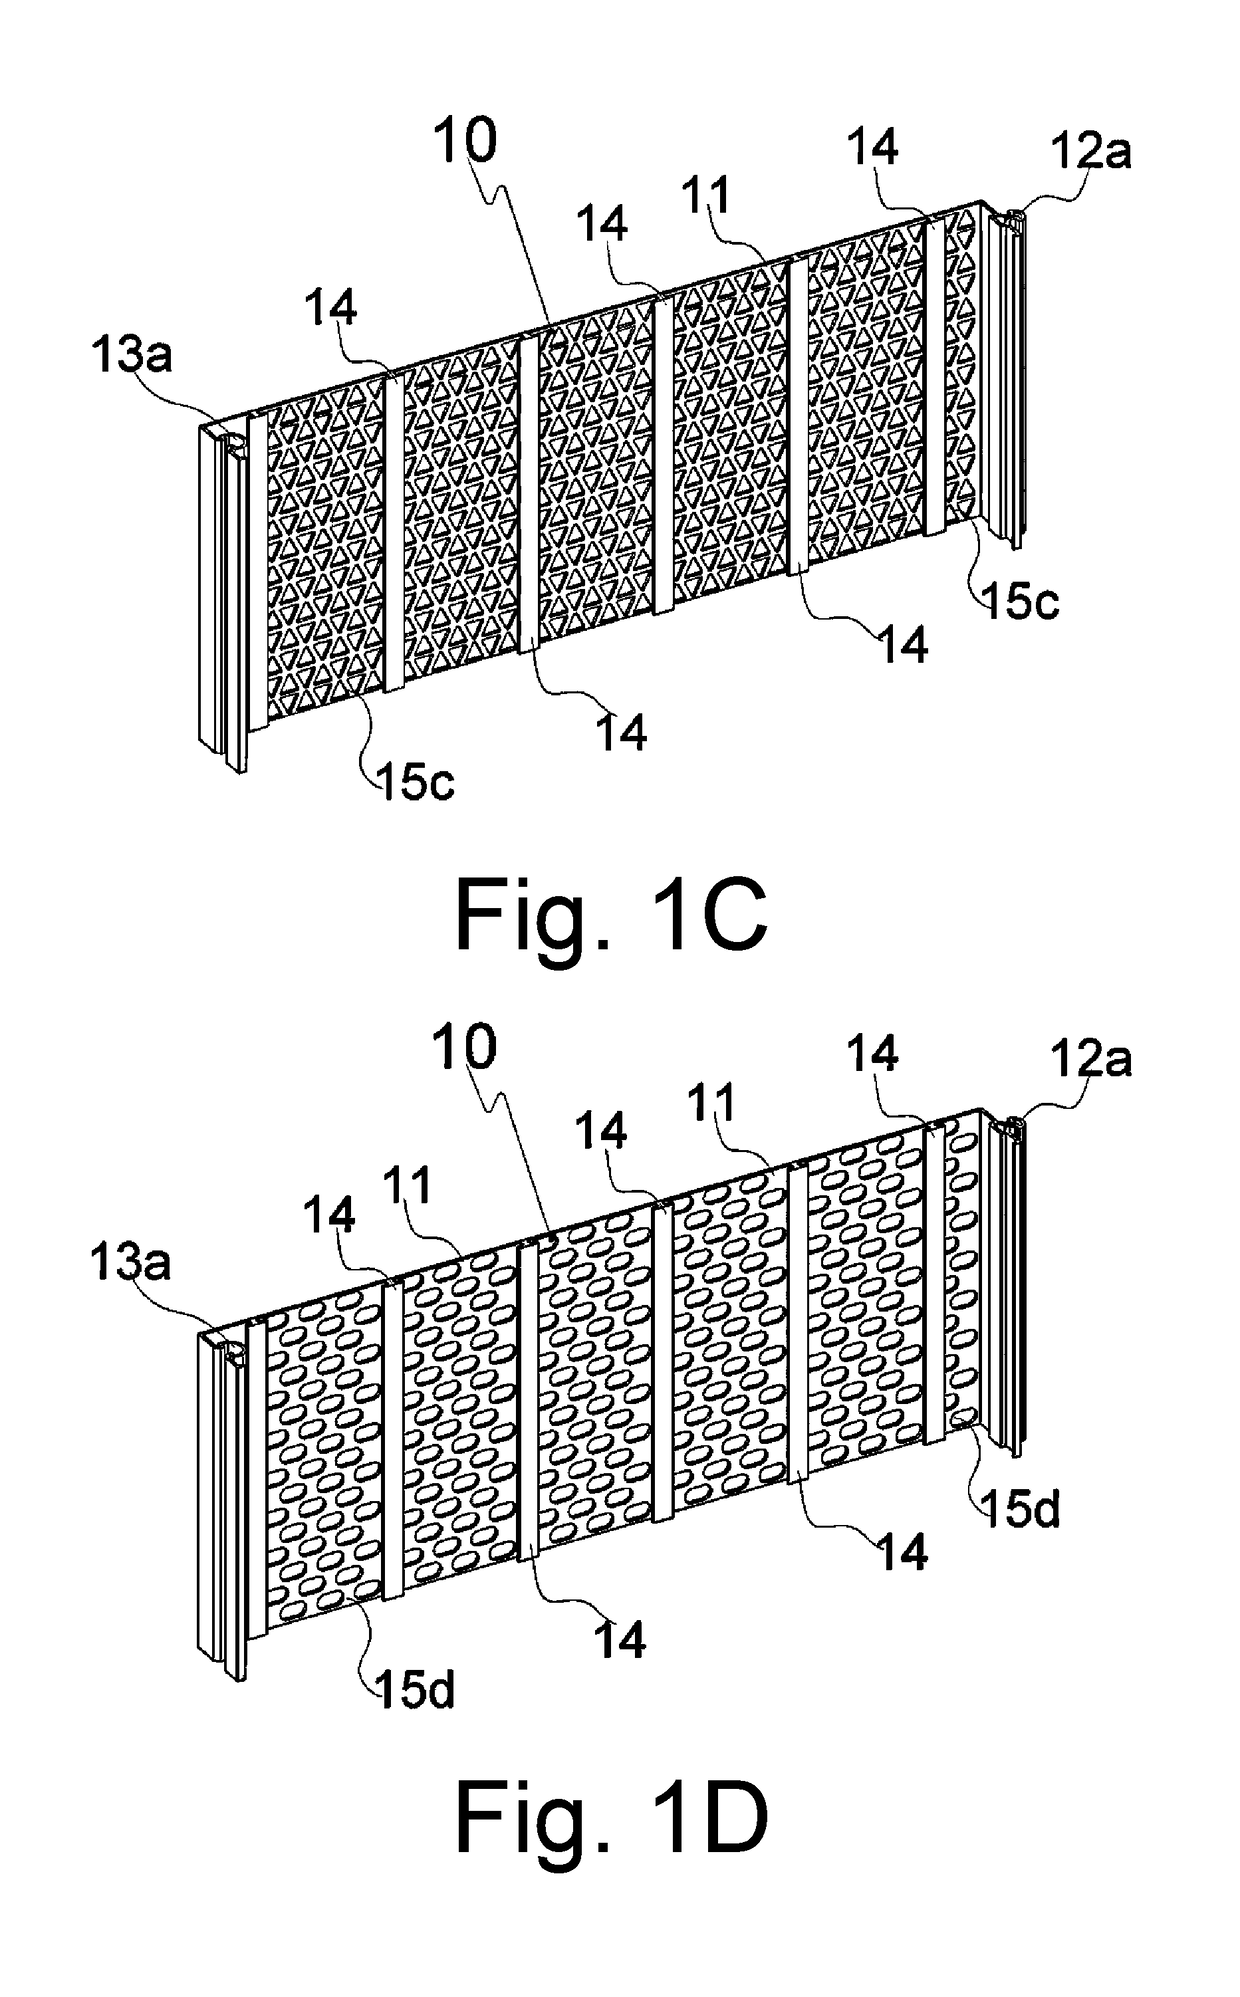 Modular, multiperforated permanent formwork construction system for reinforced concrete